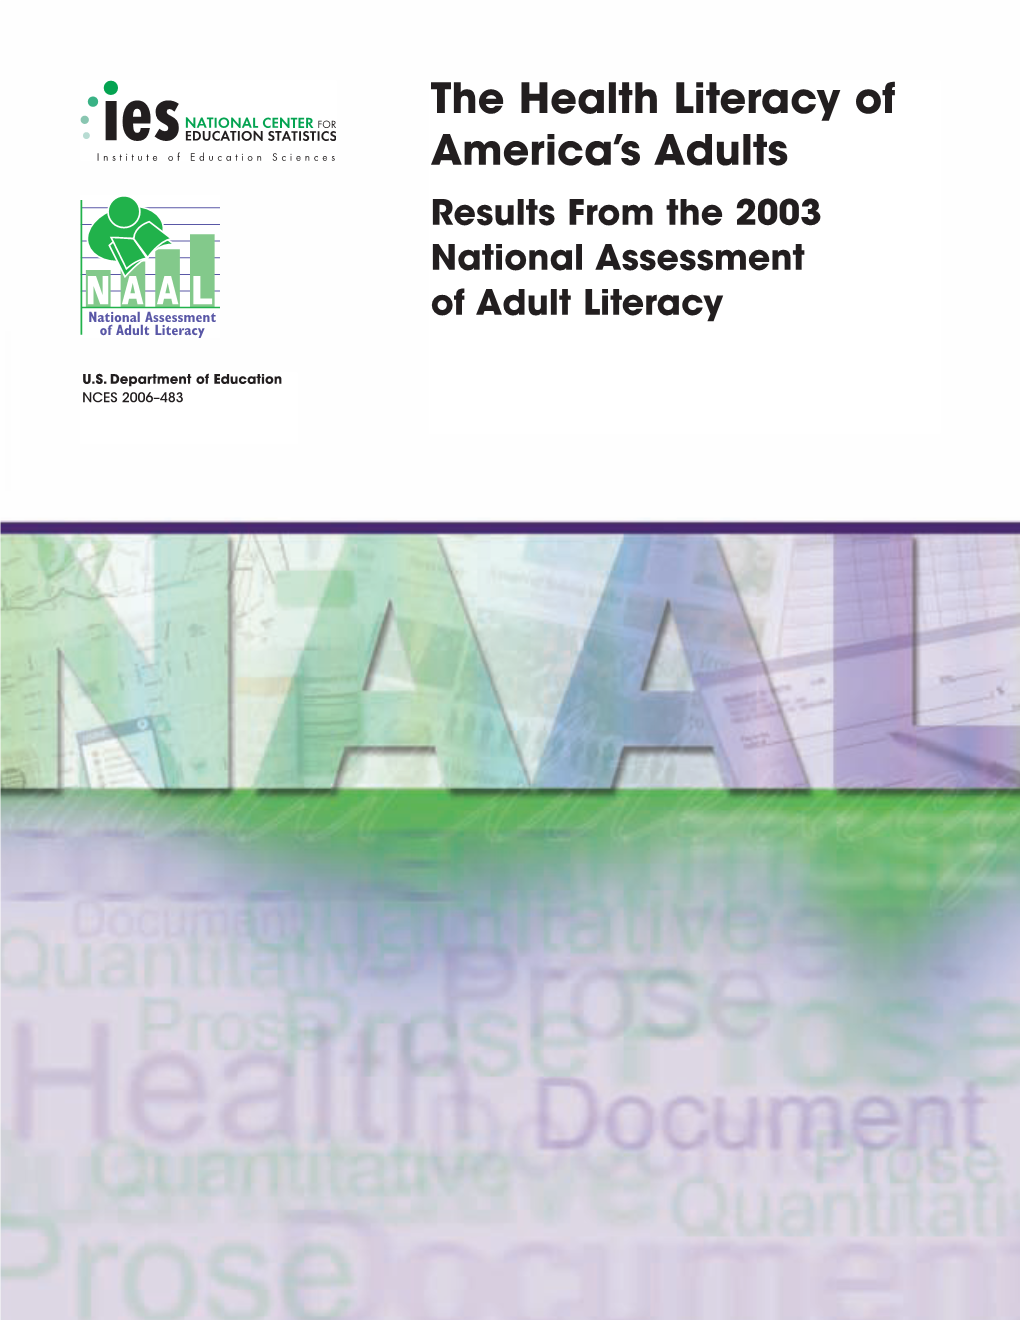 The Health Literacy of America's Adults